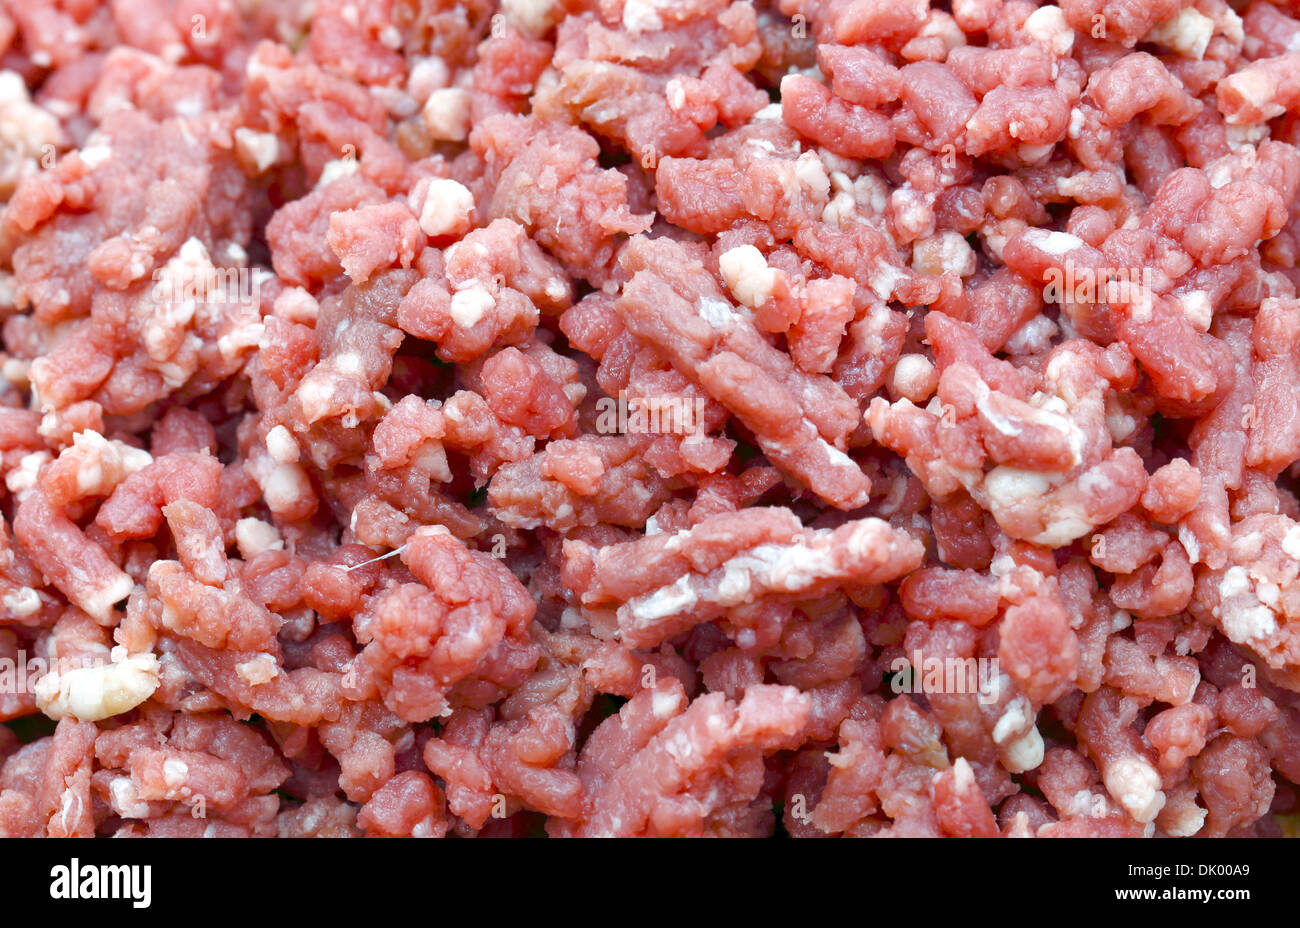 Macro view of raw minced beef, made from a rump steak. Stock Photo